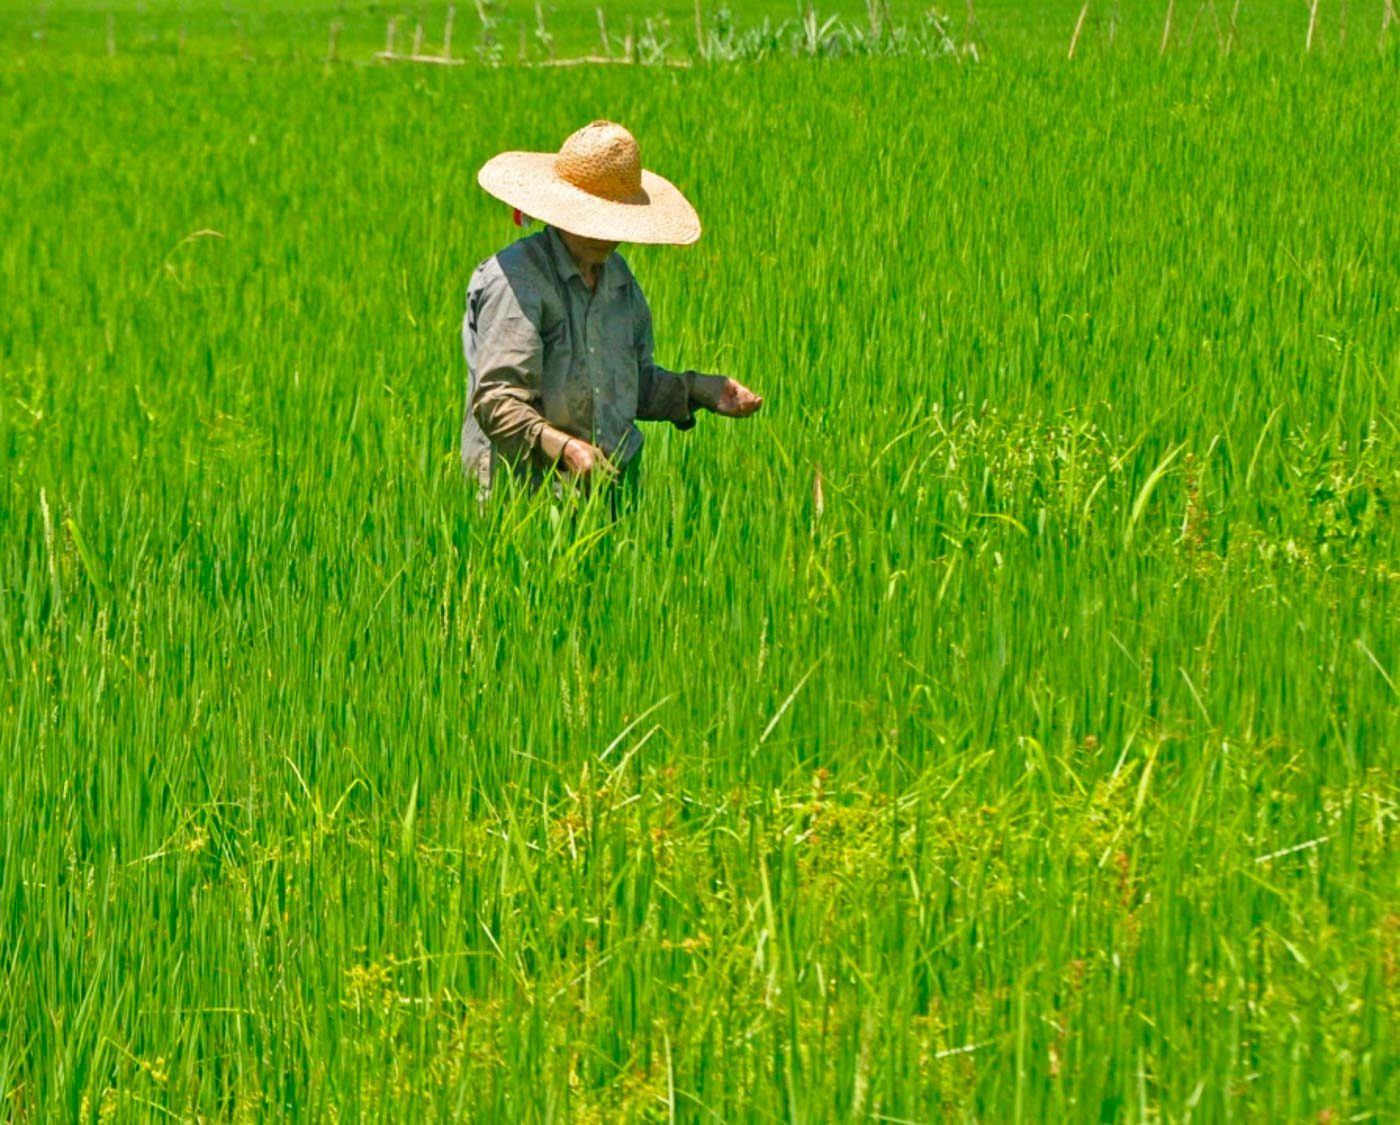 Gov’t should provide ‘offsetting compensation’ to farmers – PIDS study